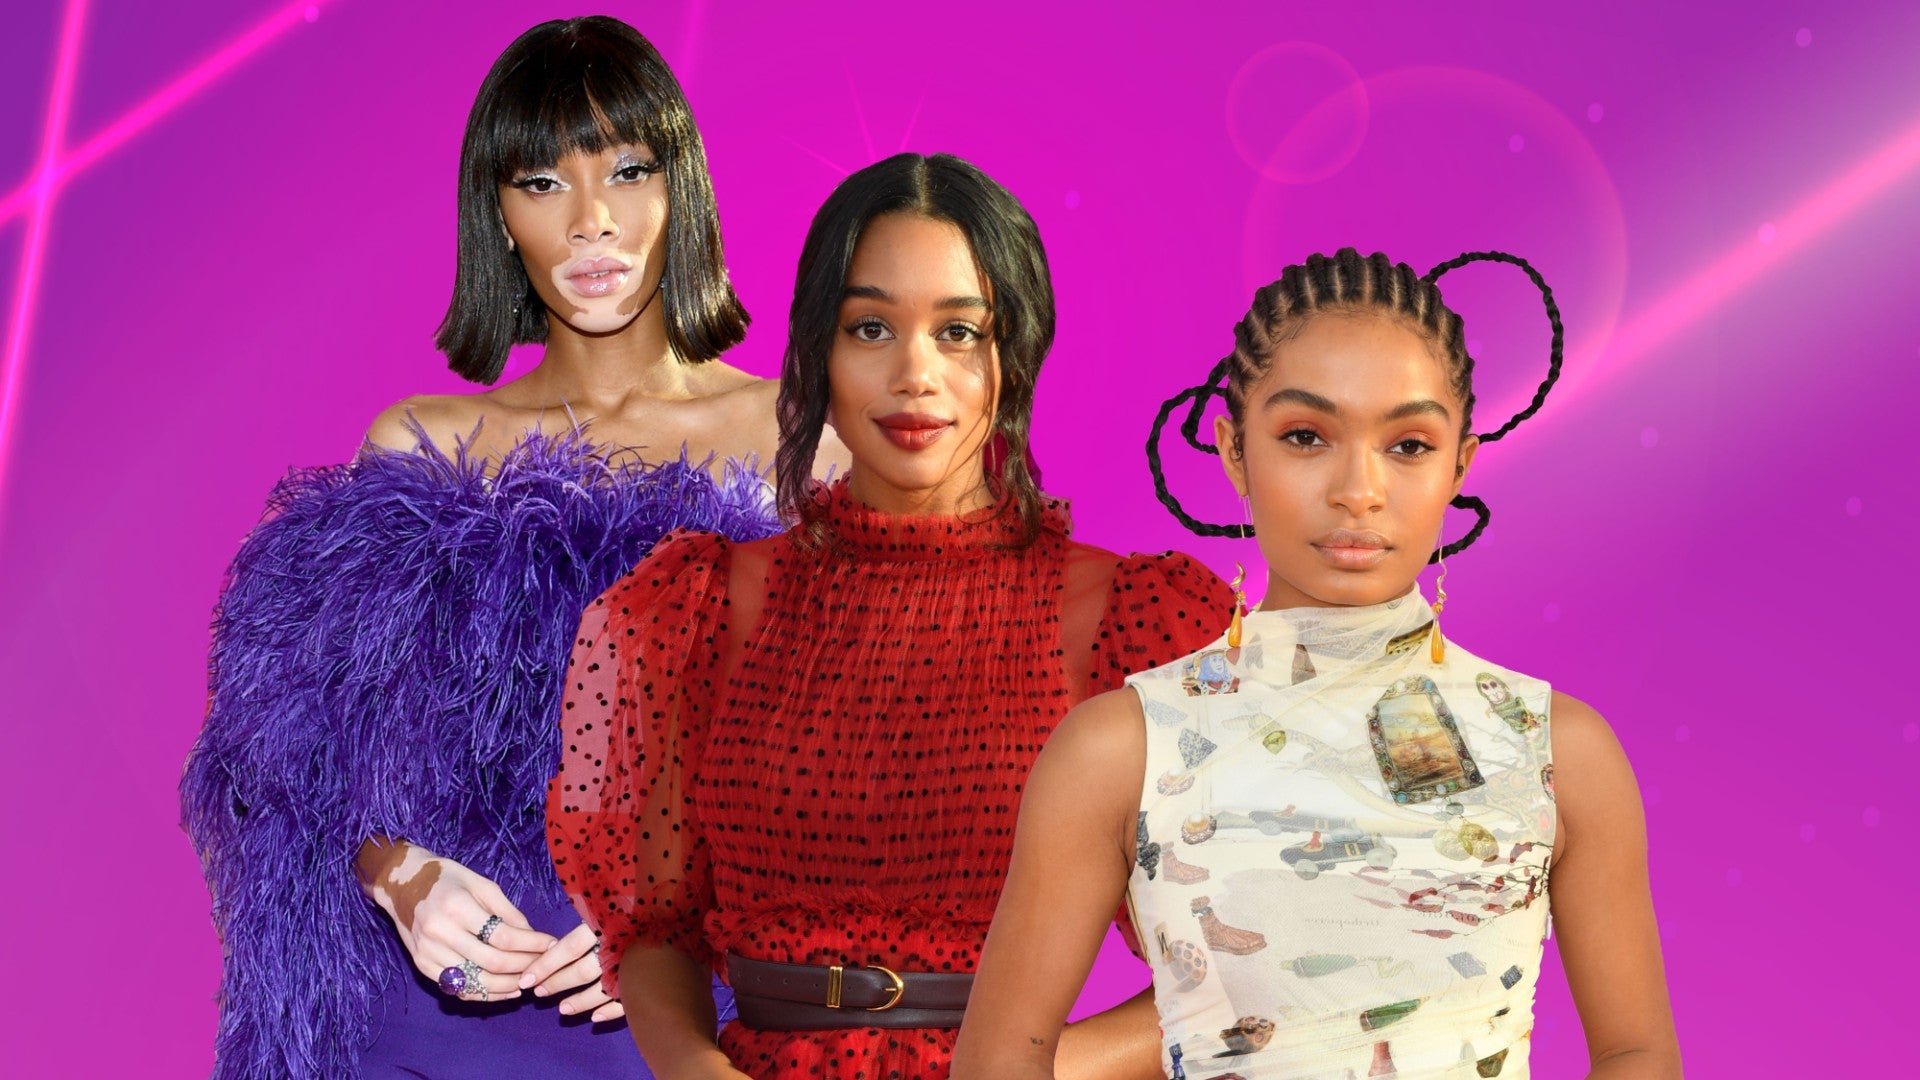 Check out the African style stars that have made the 2019 CFDA